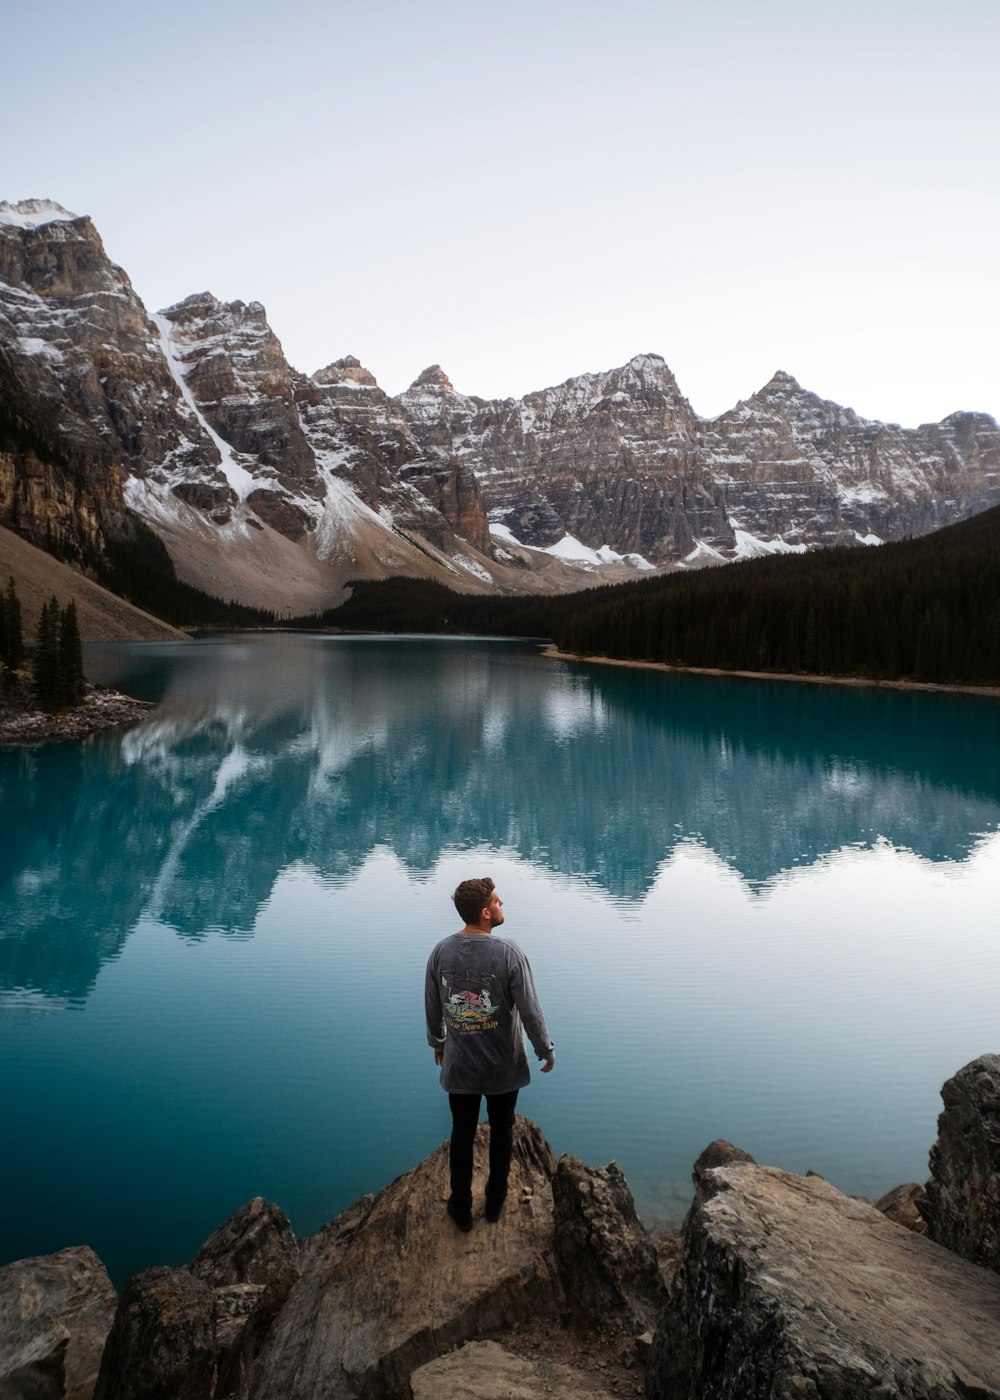 a man standing on a rock looking at a lake with mountains in the background